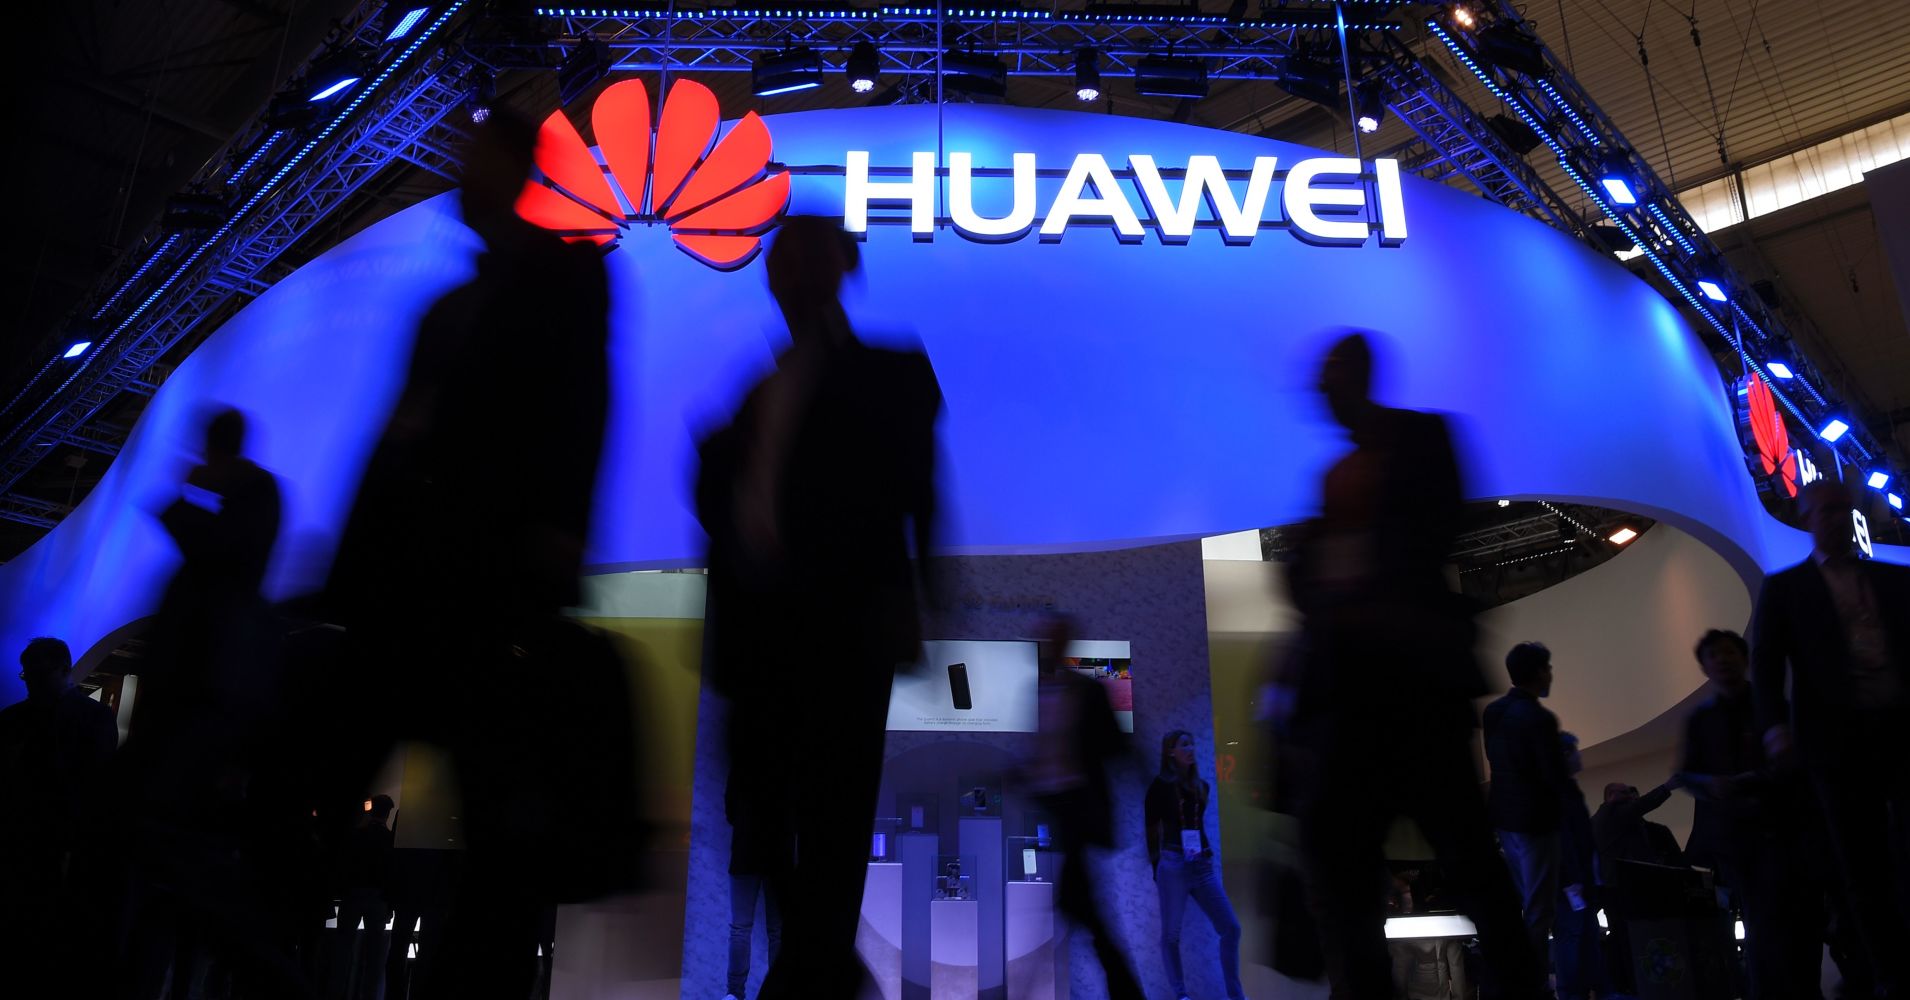 Visitors pass in front of the Huawei's stand on the first day of the Mobile World Congress in Barcelonaon on February 27, 2017 in Barcelona.